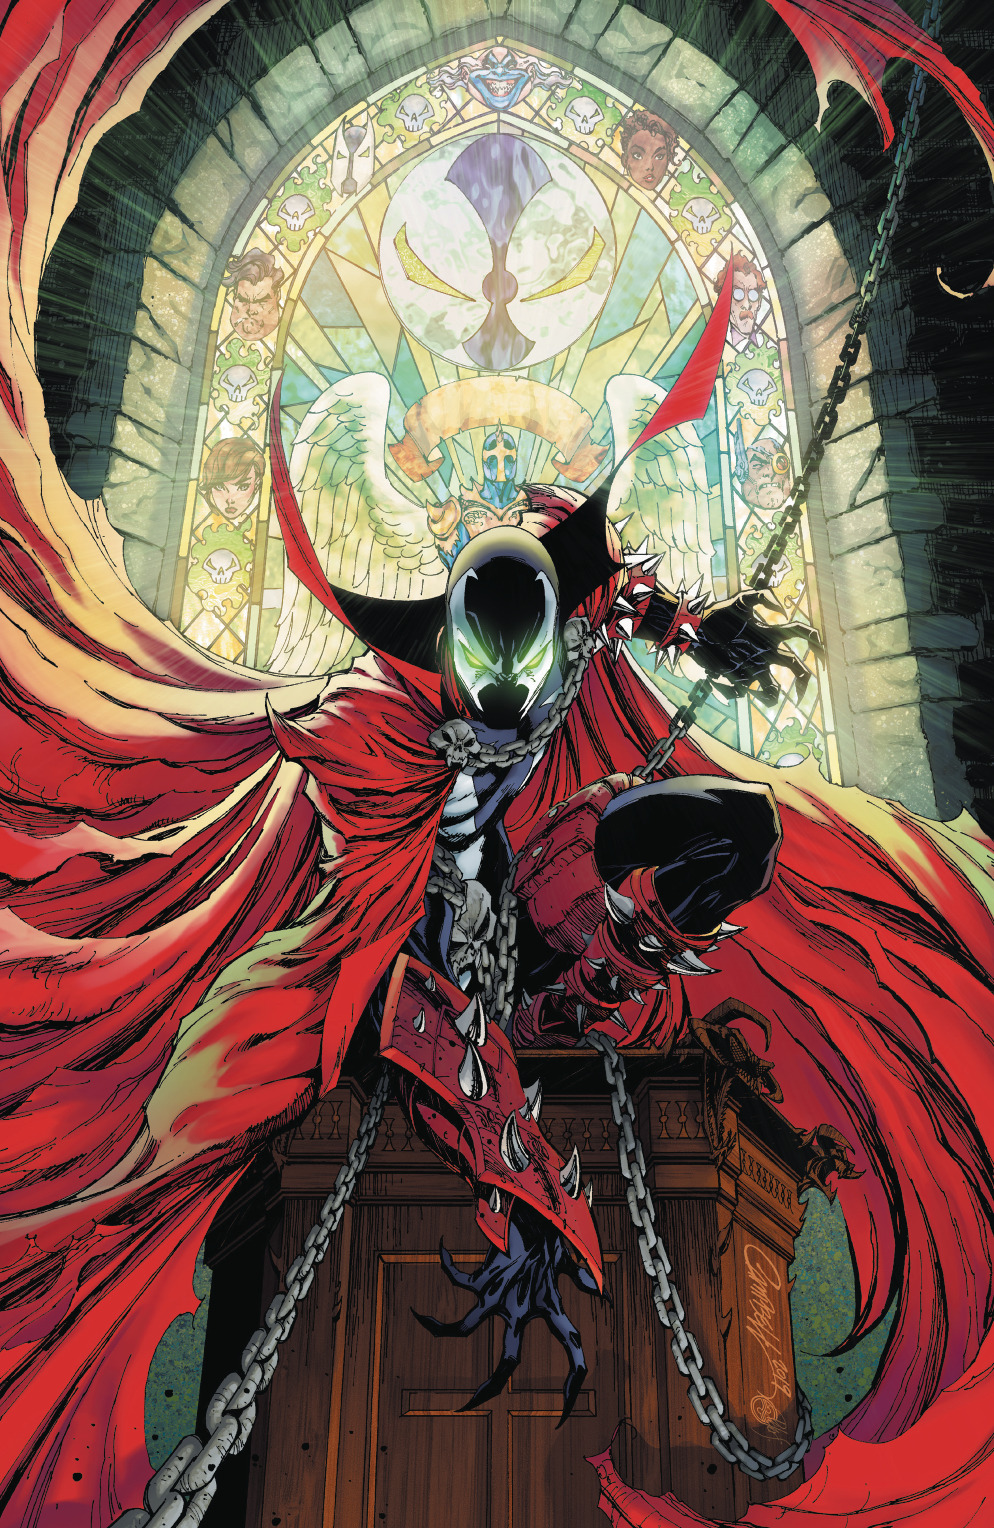 Ŧꃅᙍ ꍏ尺Ϯ Ծ₣ ੮ℌΣ Շ⊕√乇Ɽ — Spawn #300 [Textless] (Variant 